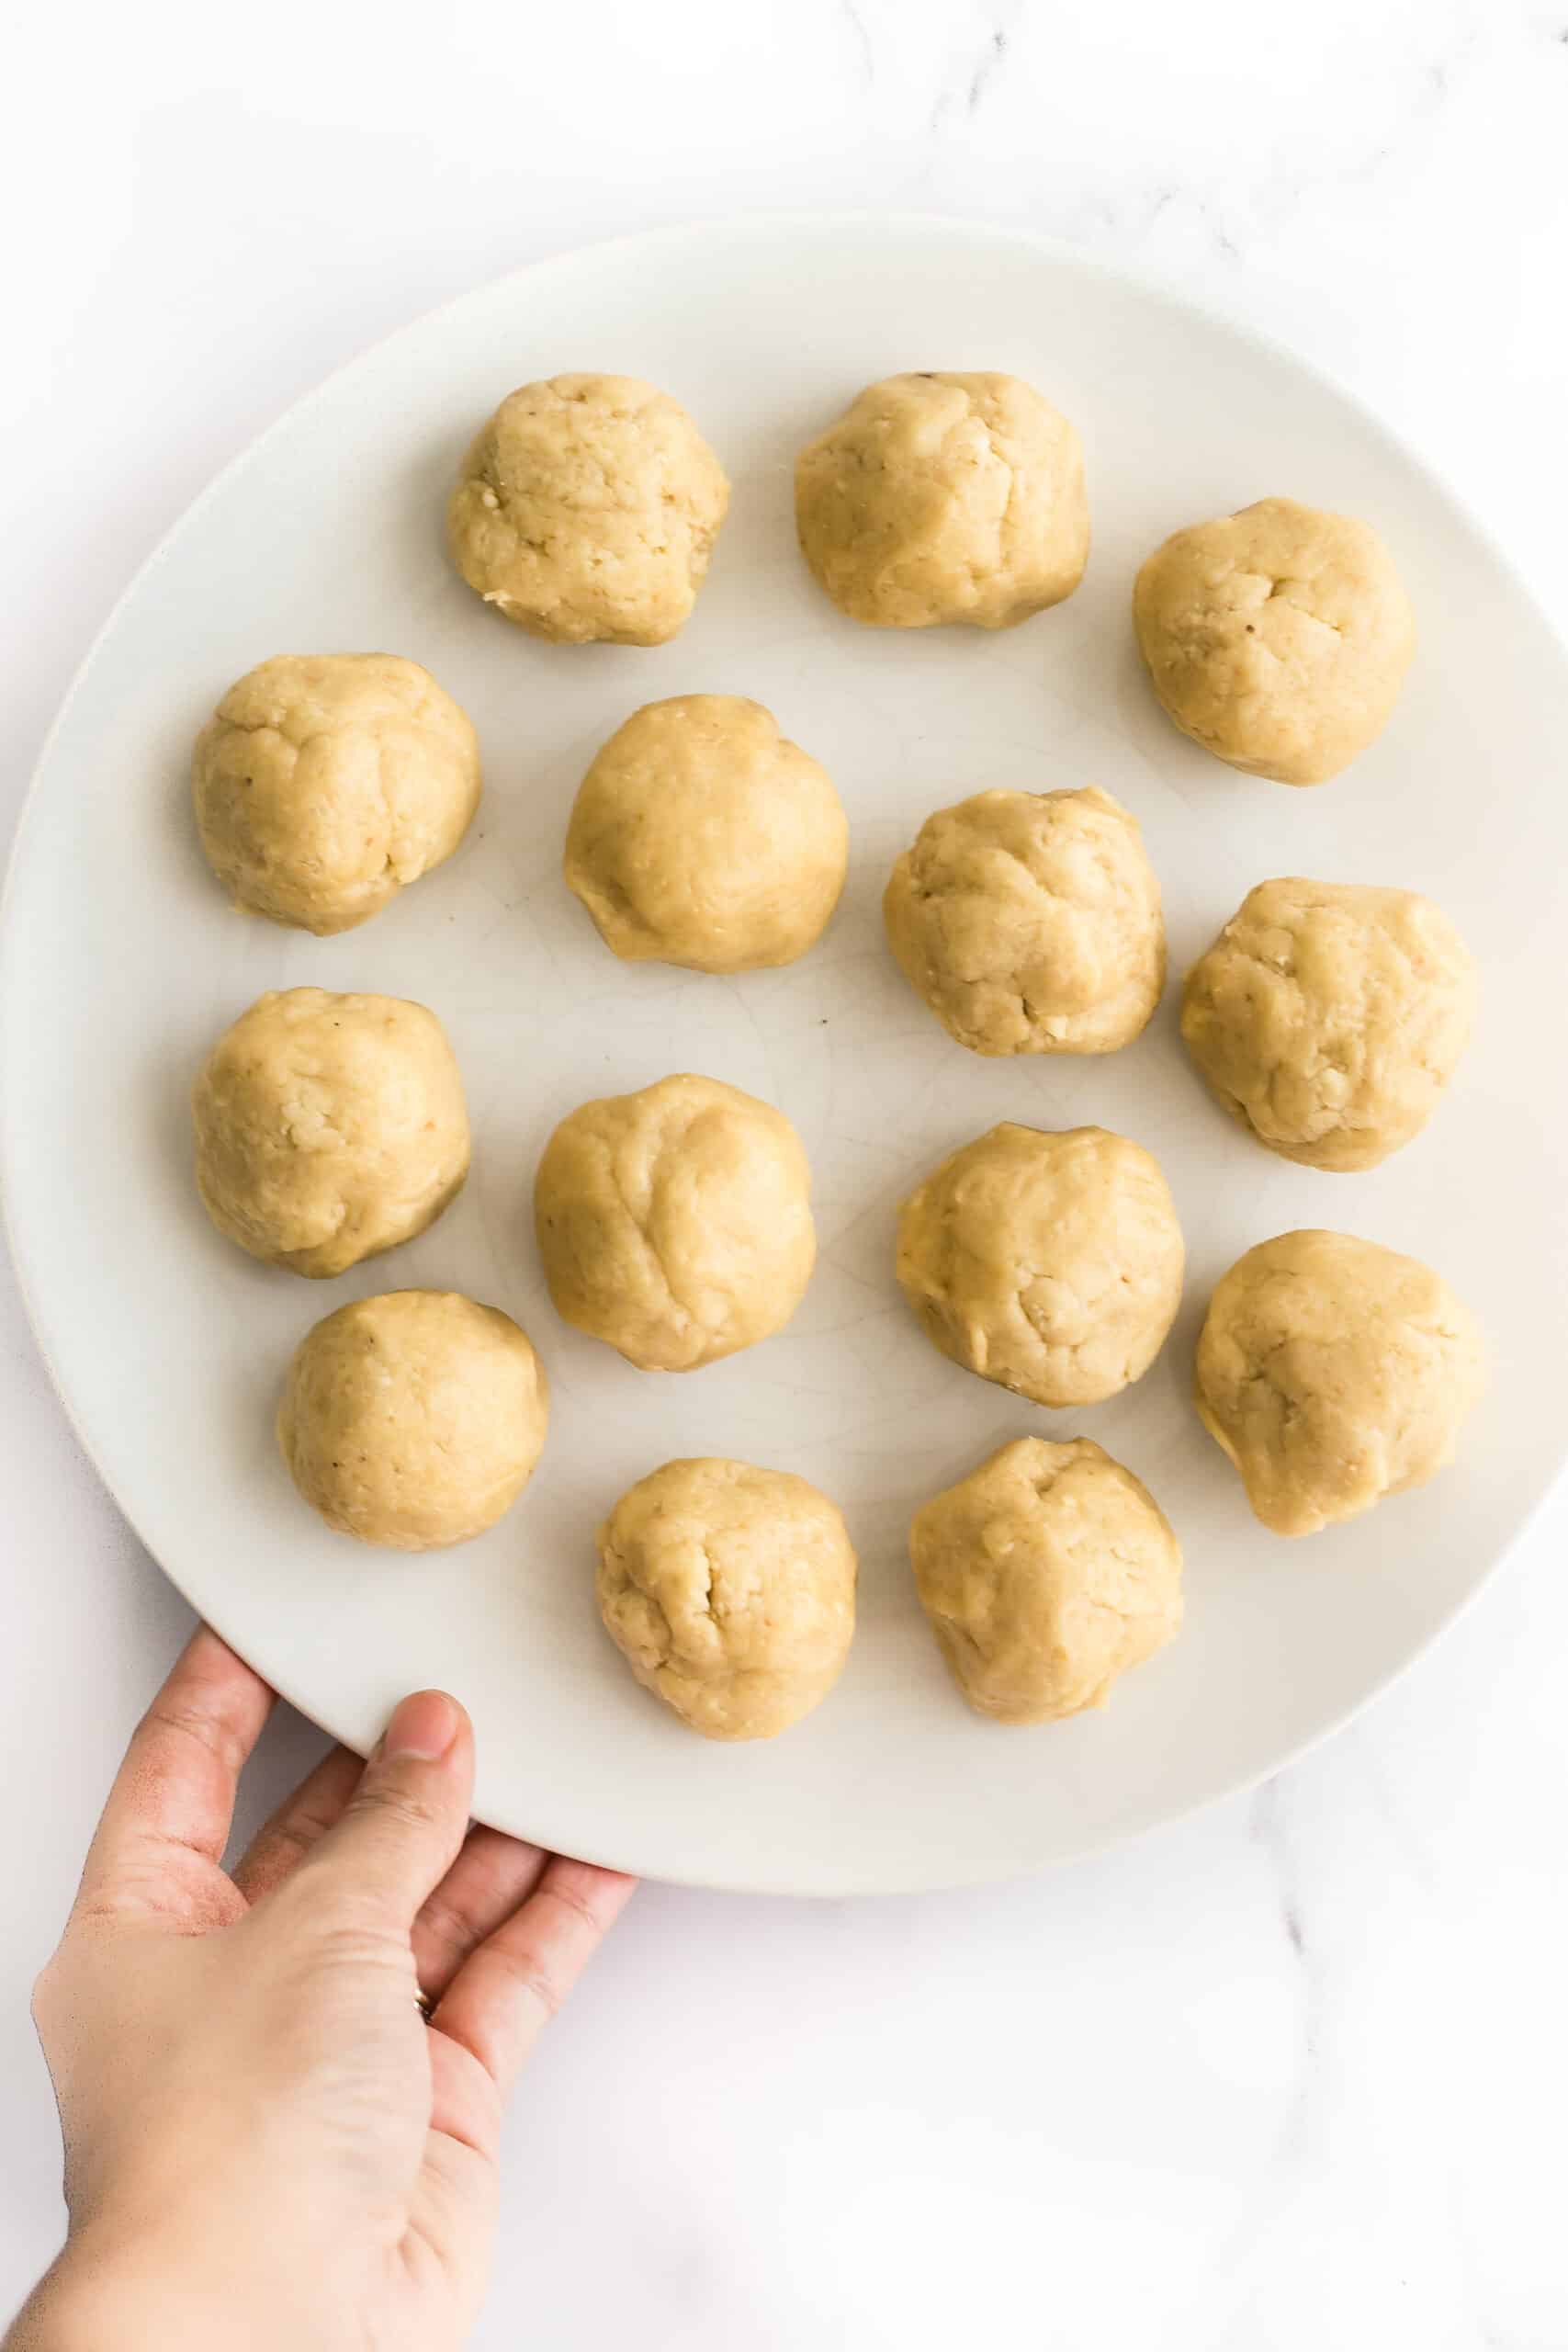 Hand holding a plate full of cashew cookie dough balls.